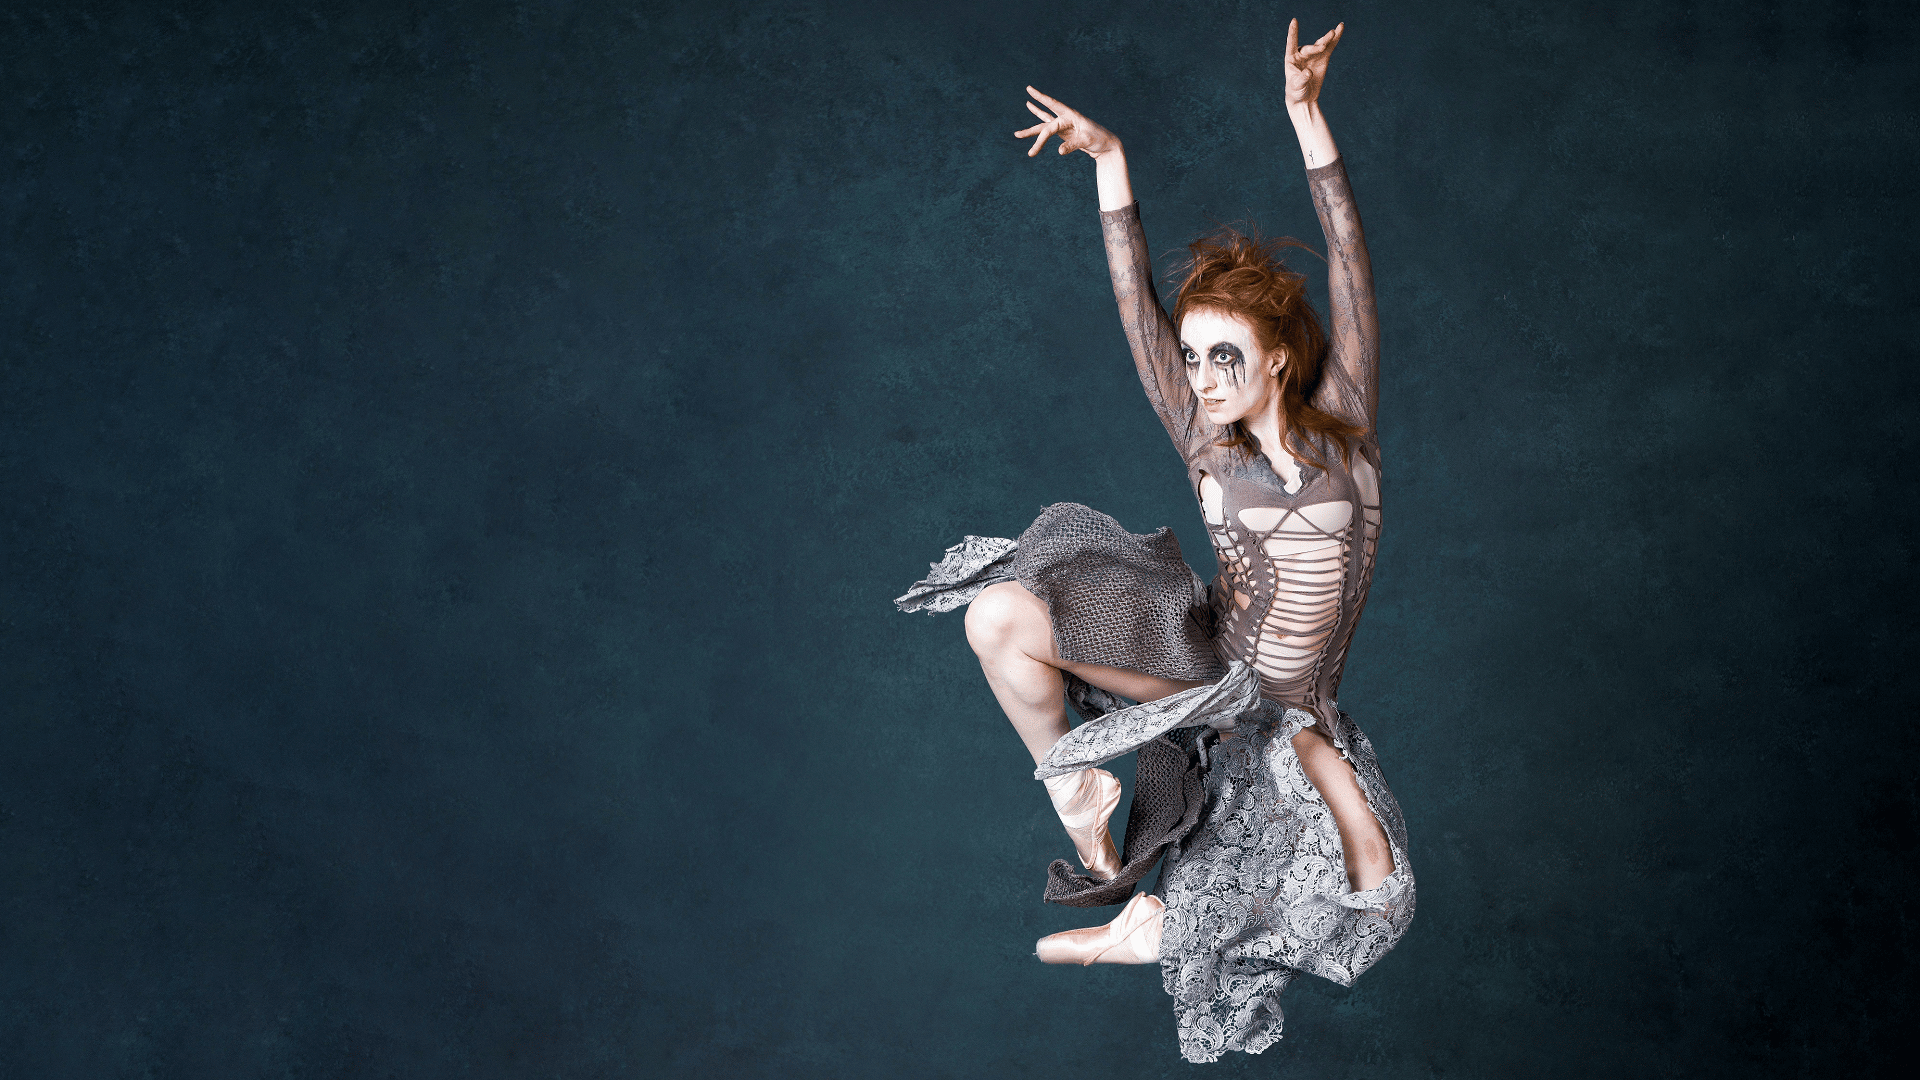 A ballet dancer with red hair leaps off the ground